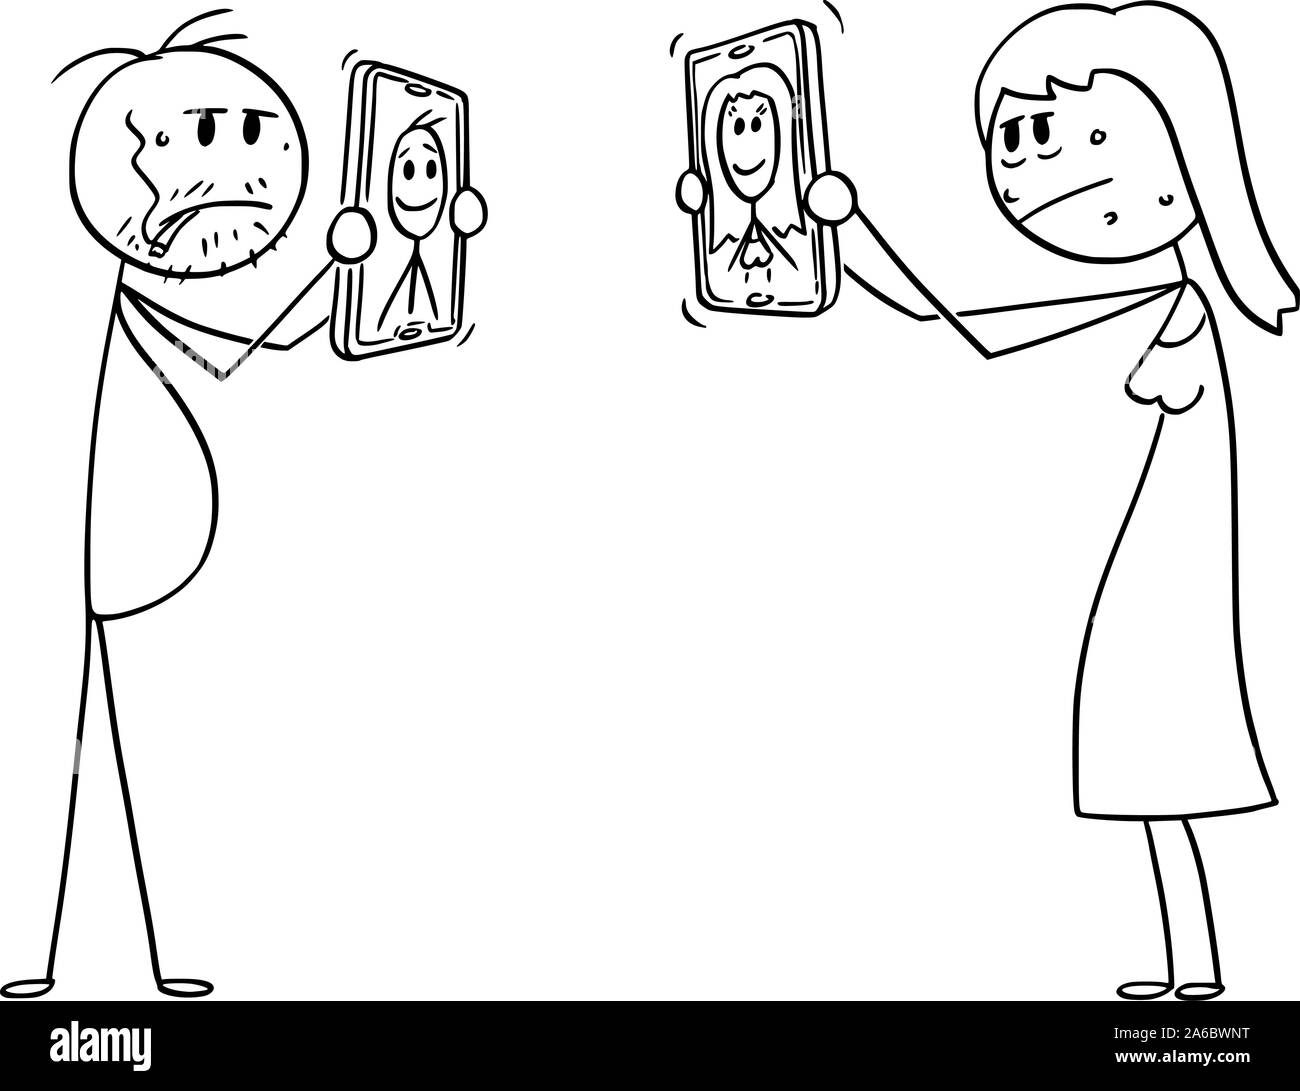 Vector cartoon stick figure drawing conceptual illustration of ordinary or ugly man and woman, showing their unrealistic retouched and idealized photos on social networks on mobile phones. Stock Vector